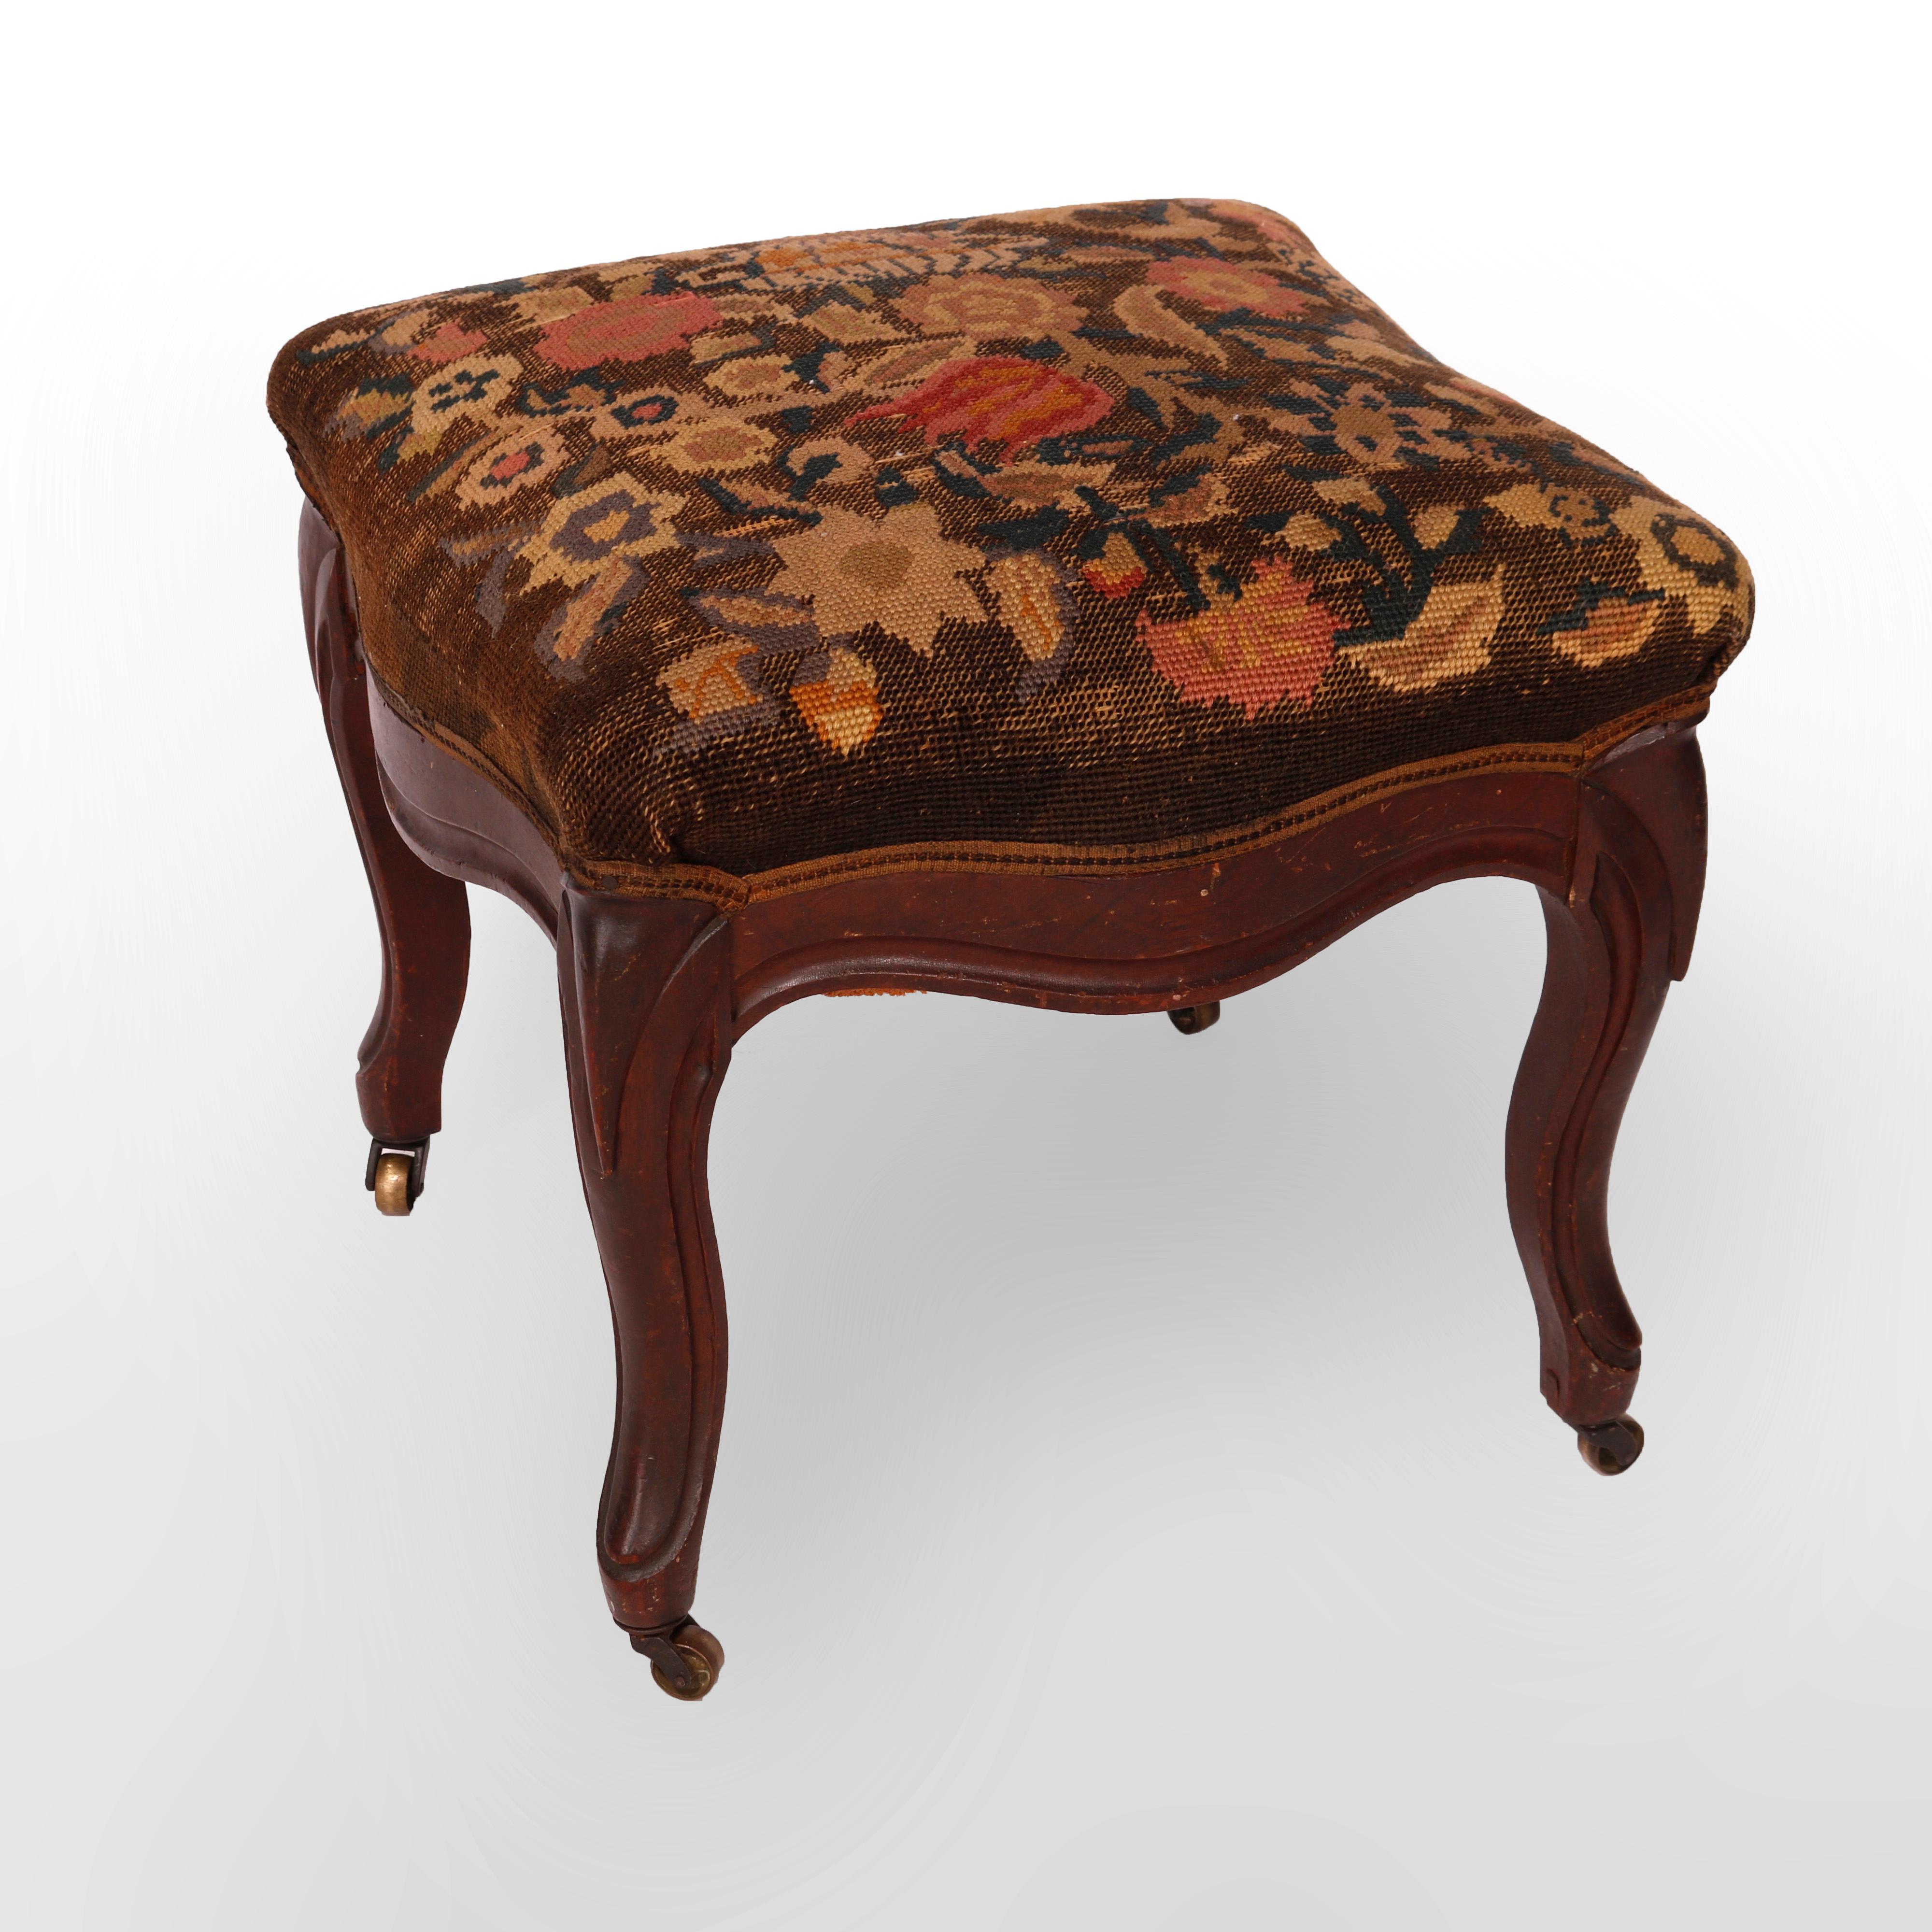 19th Century Antique Walnut Finger Carved Needlepoint Foot Stool, Circa 1890